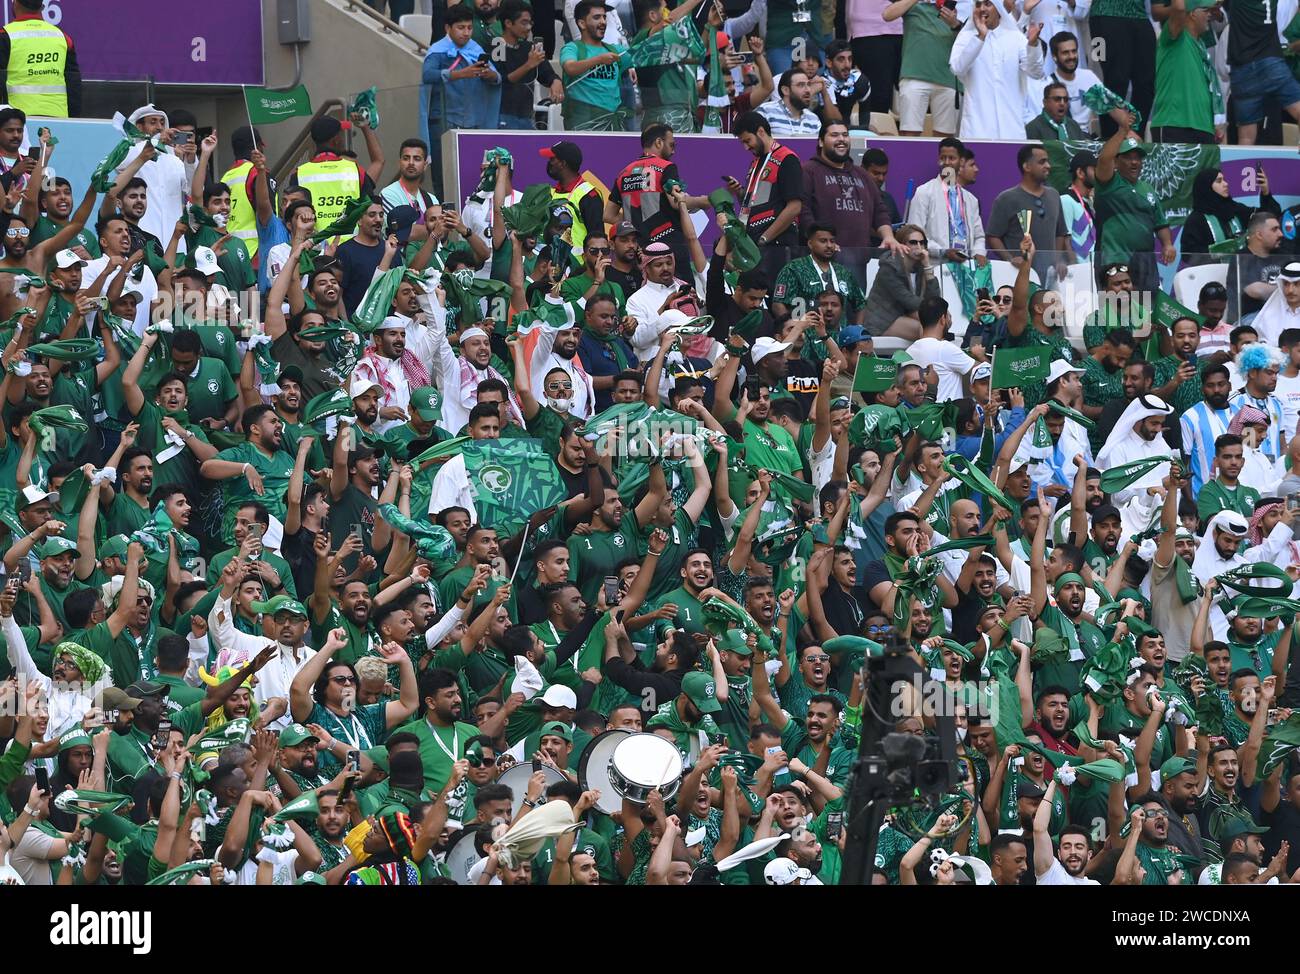 Saudi Arabian fans cheering for their team during its 2-1 group stage win versus Argentina in the opening match of the 2022 FIFA World Cup in Qatar. Stock Photo